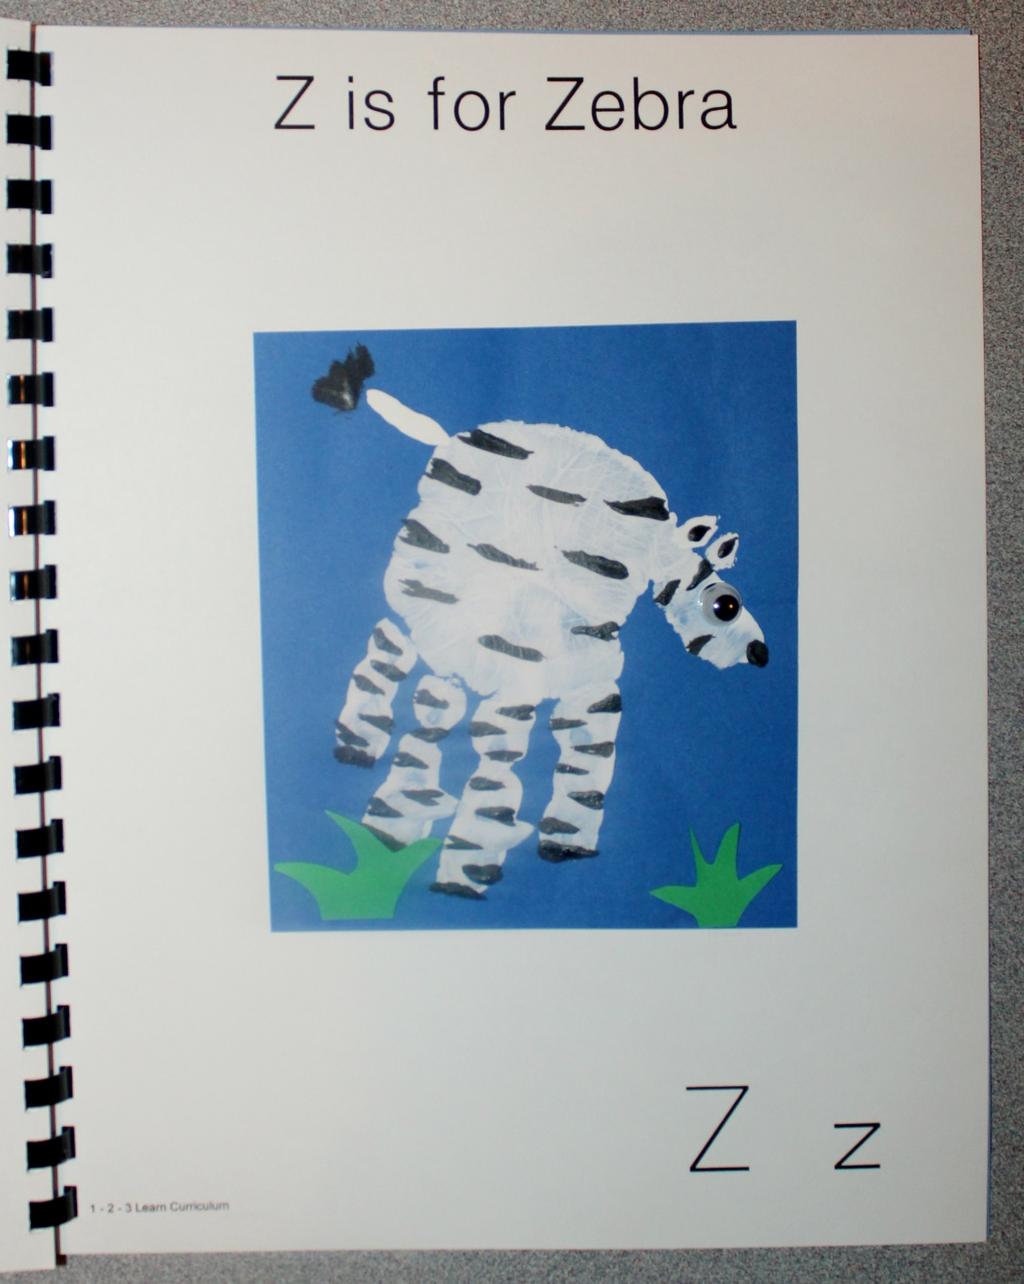 Z is for Zebra Paint the child s hand white and place on blue card stock. When dry, using white paint add a small tail and ears.